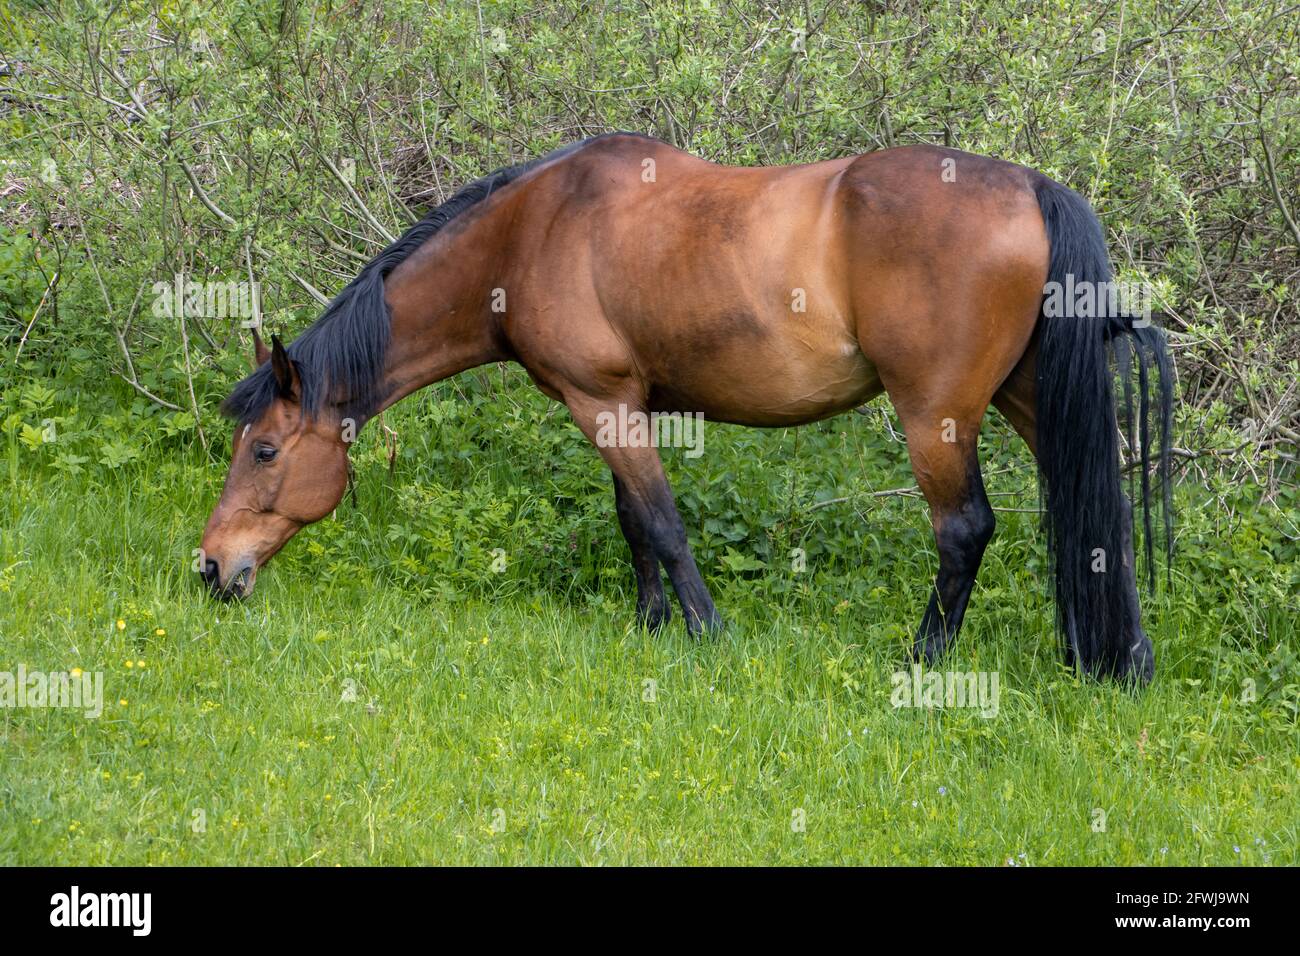 Thoroughbred horse grazes on a green field. Stock Photo